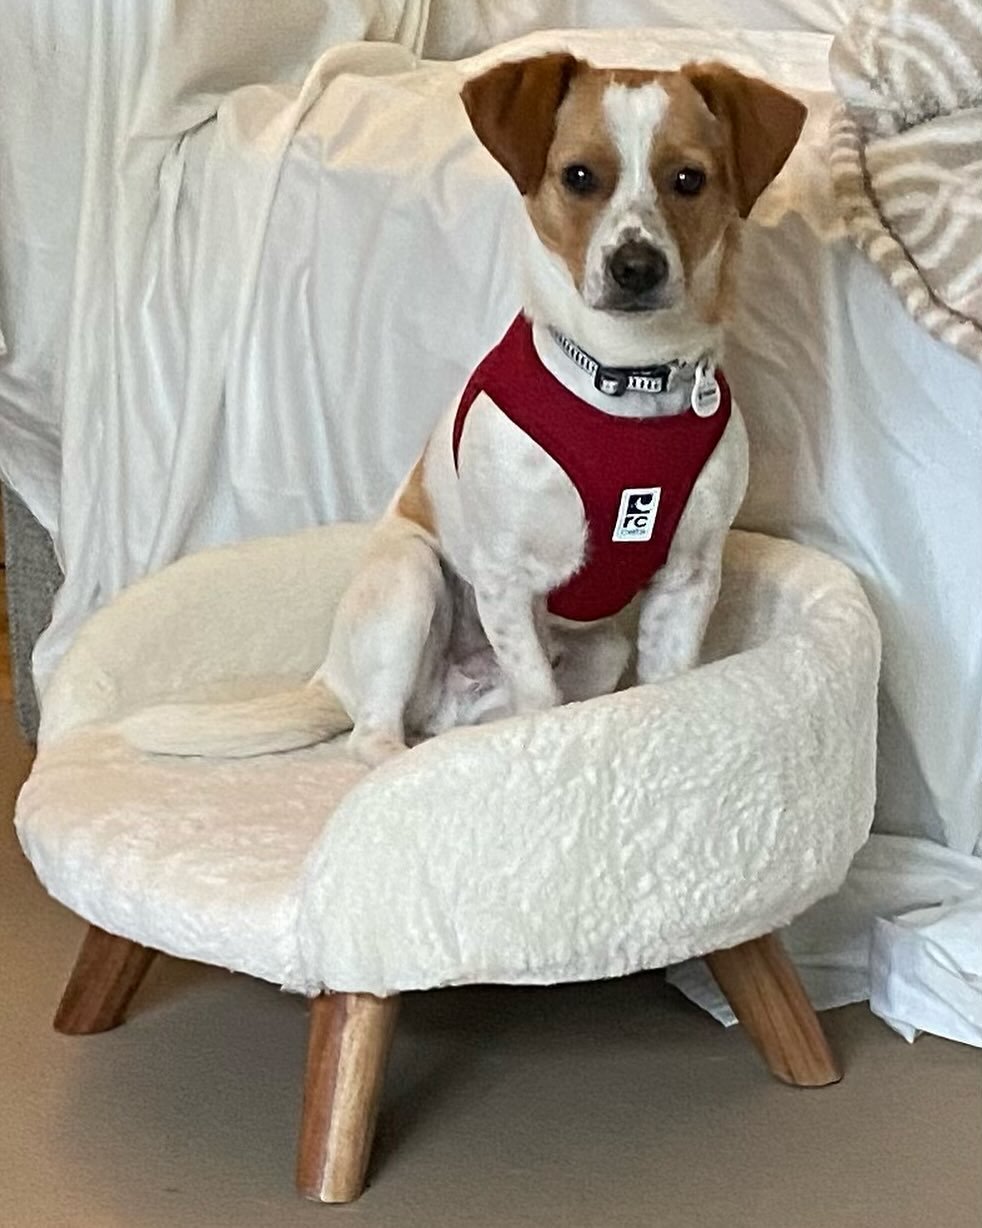 Say Hello to Pippin! A year old Jack Russell/Dachshund mix who randomly showed up at their home one night and eventually became theirs after much effort to find previous owner. Challenges like sleeping through the night, barking on leash and inside h